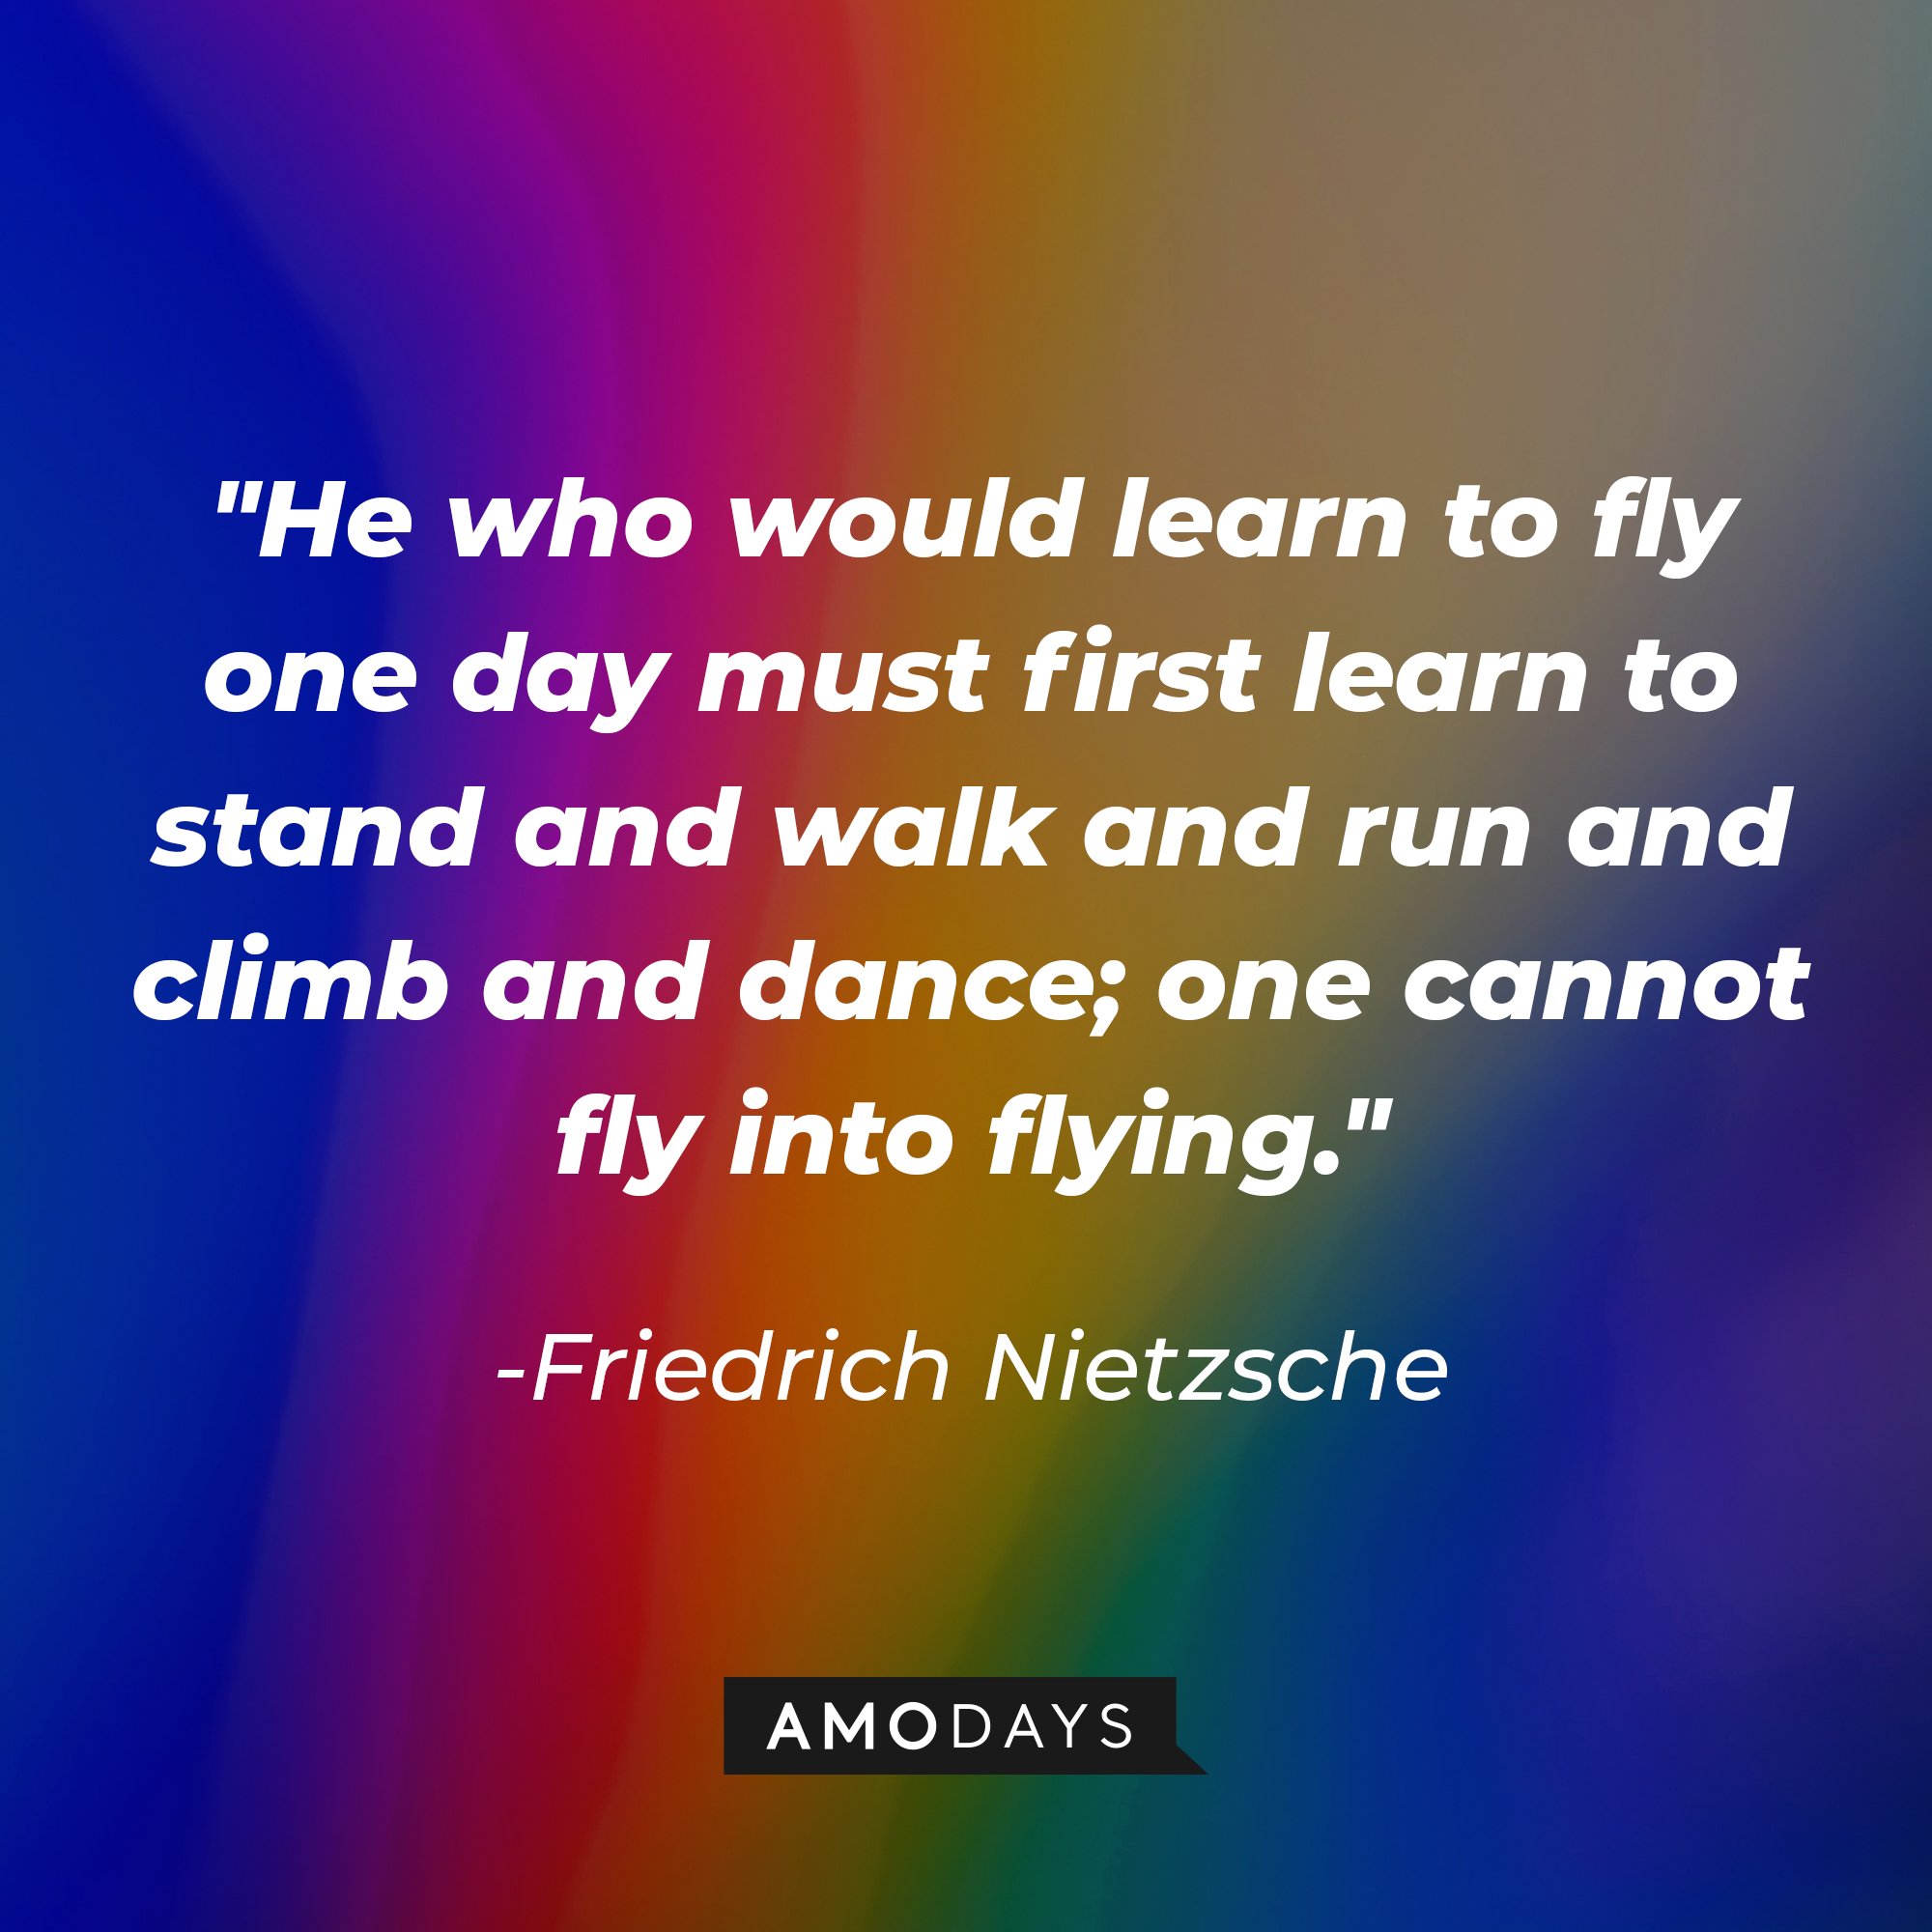  Friedrich Nietzsche’s quote: "He who would learn to fly one day must first learn to stand and walk and run and climb and dance; one cannot fly into flying." | Image: AmoDays